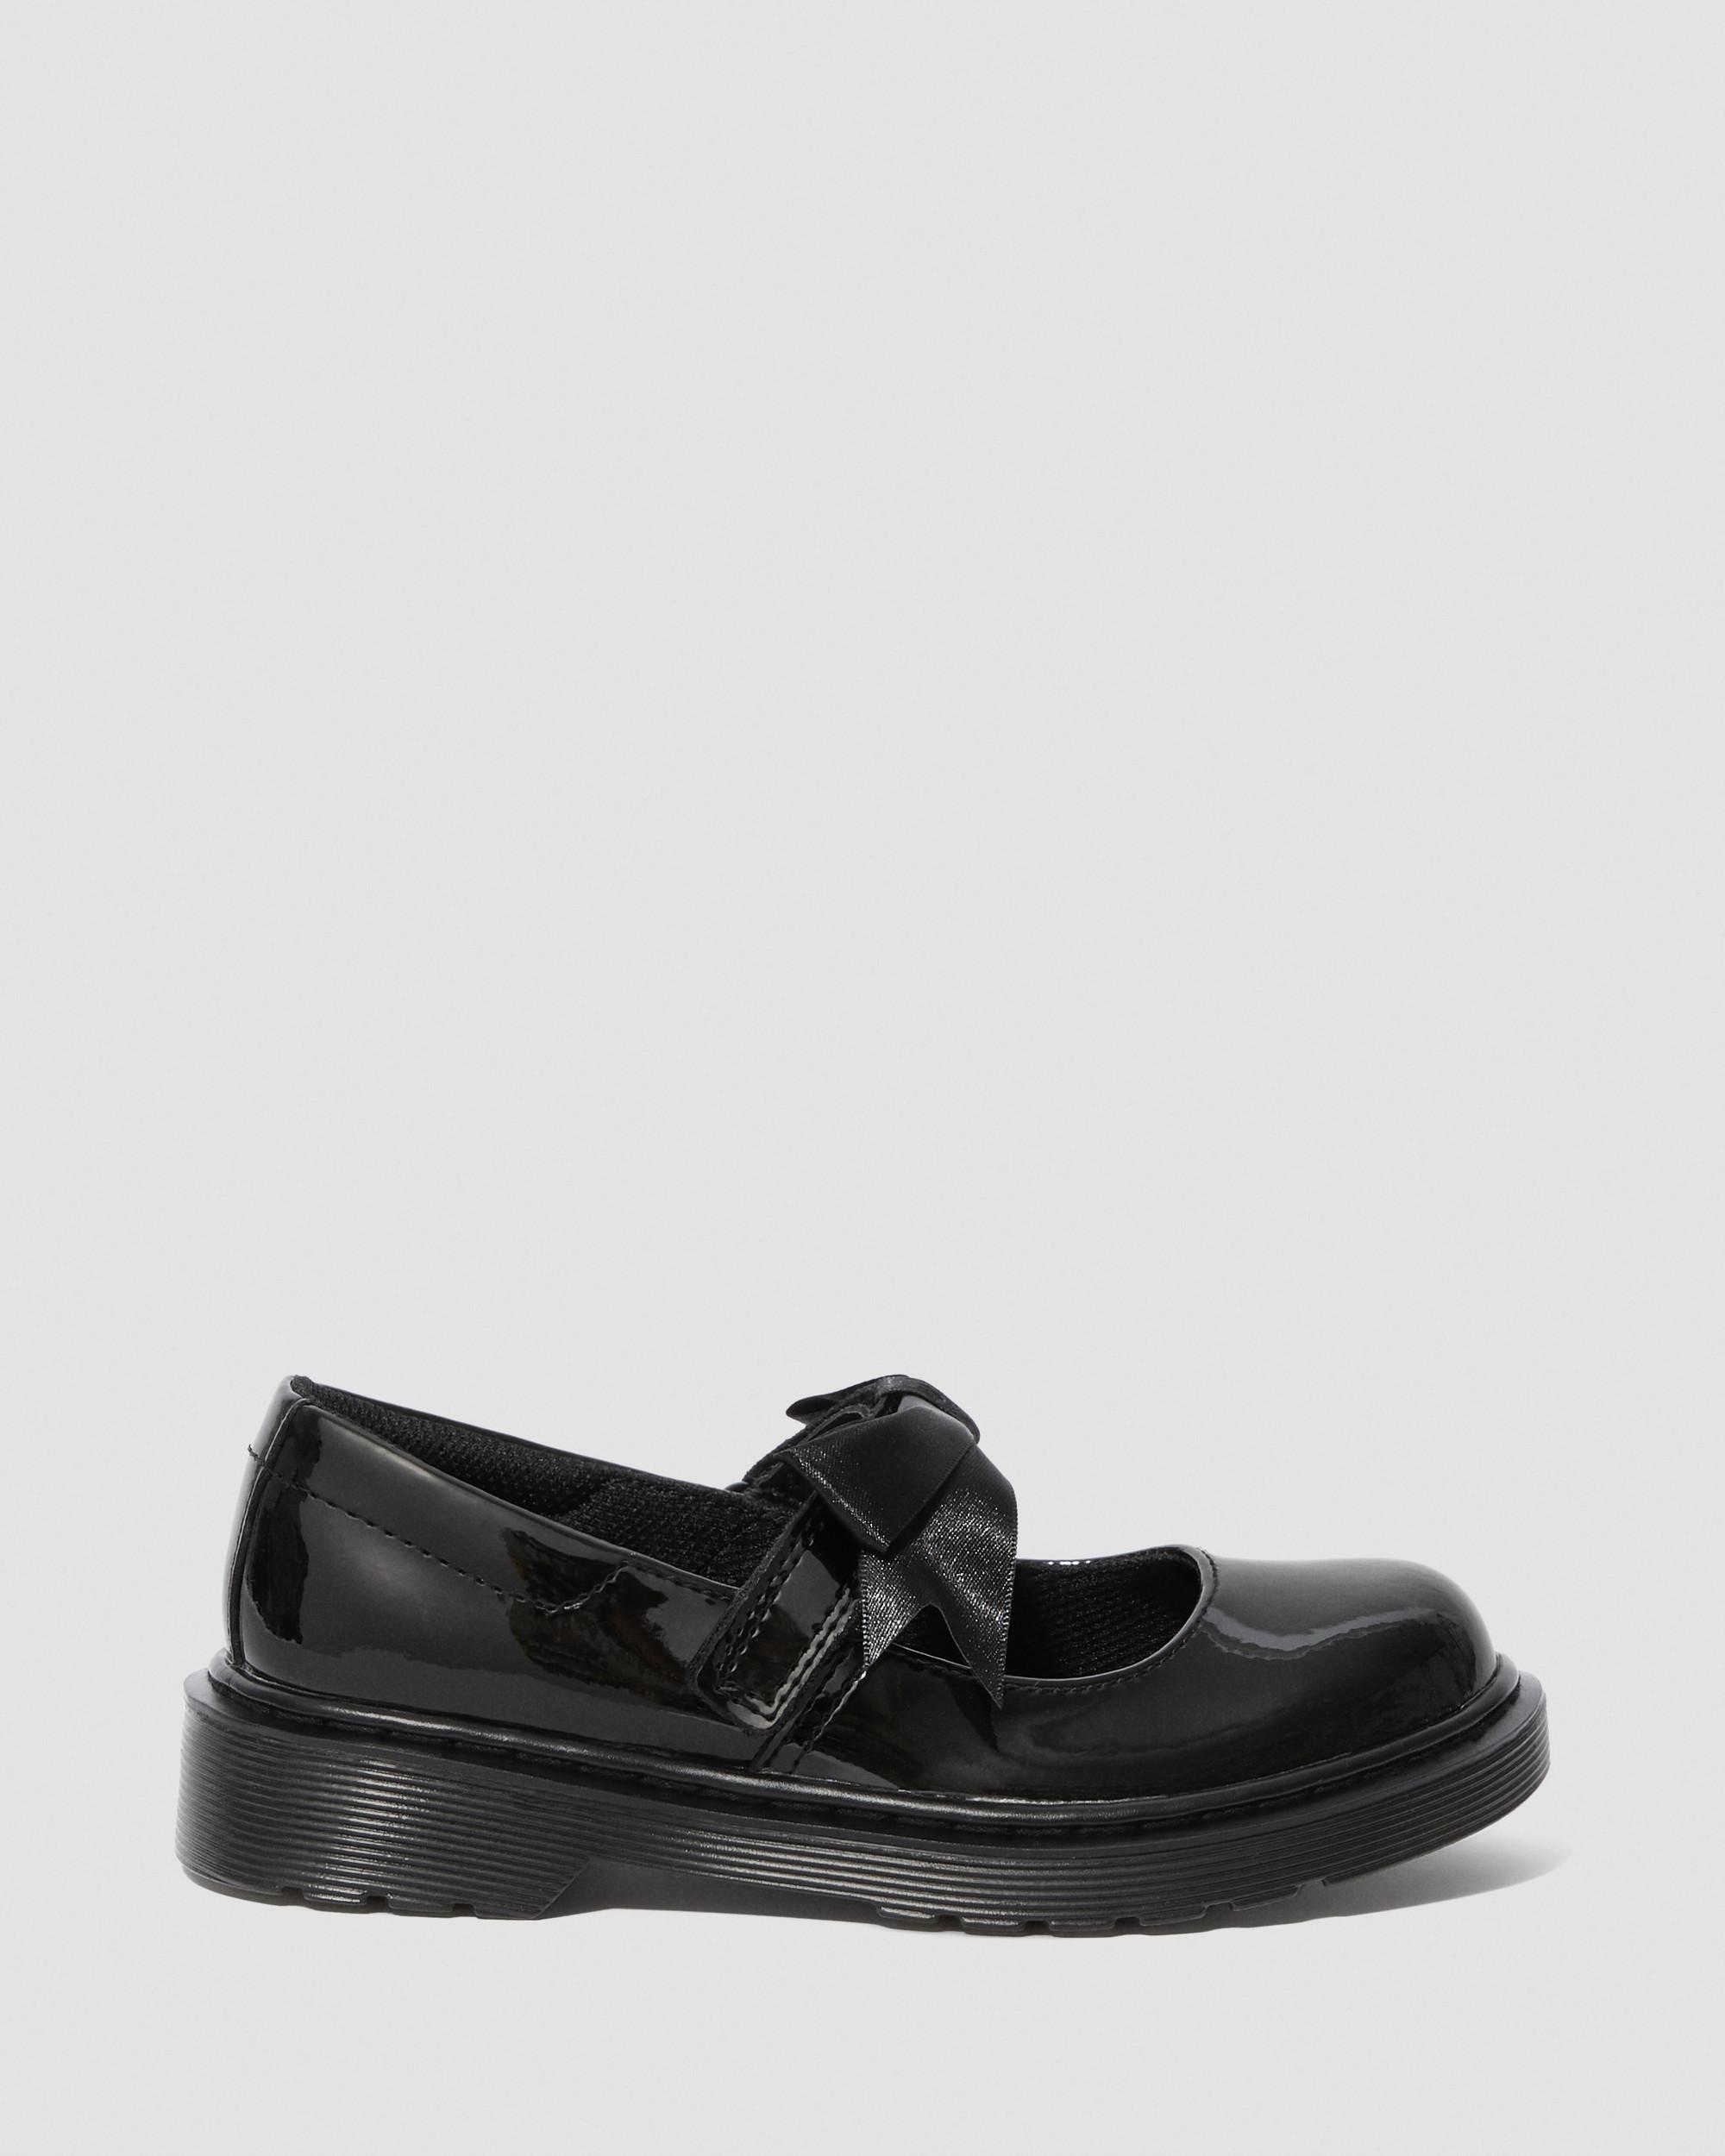 Junior Maccy II Patent Leather Mary Jane Shoes in Black